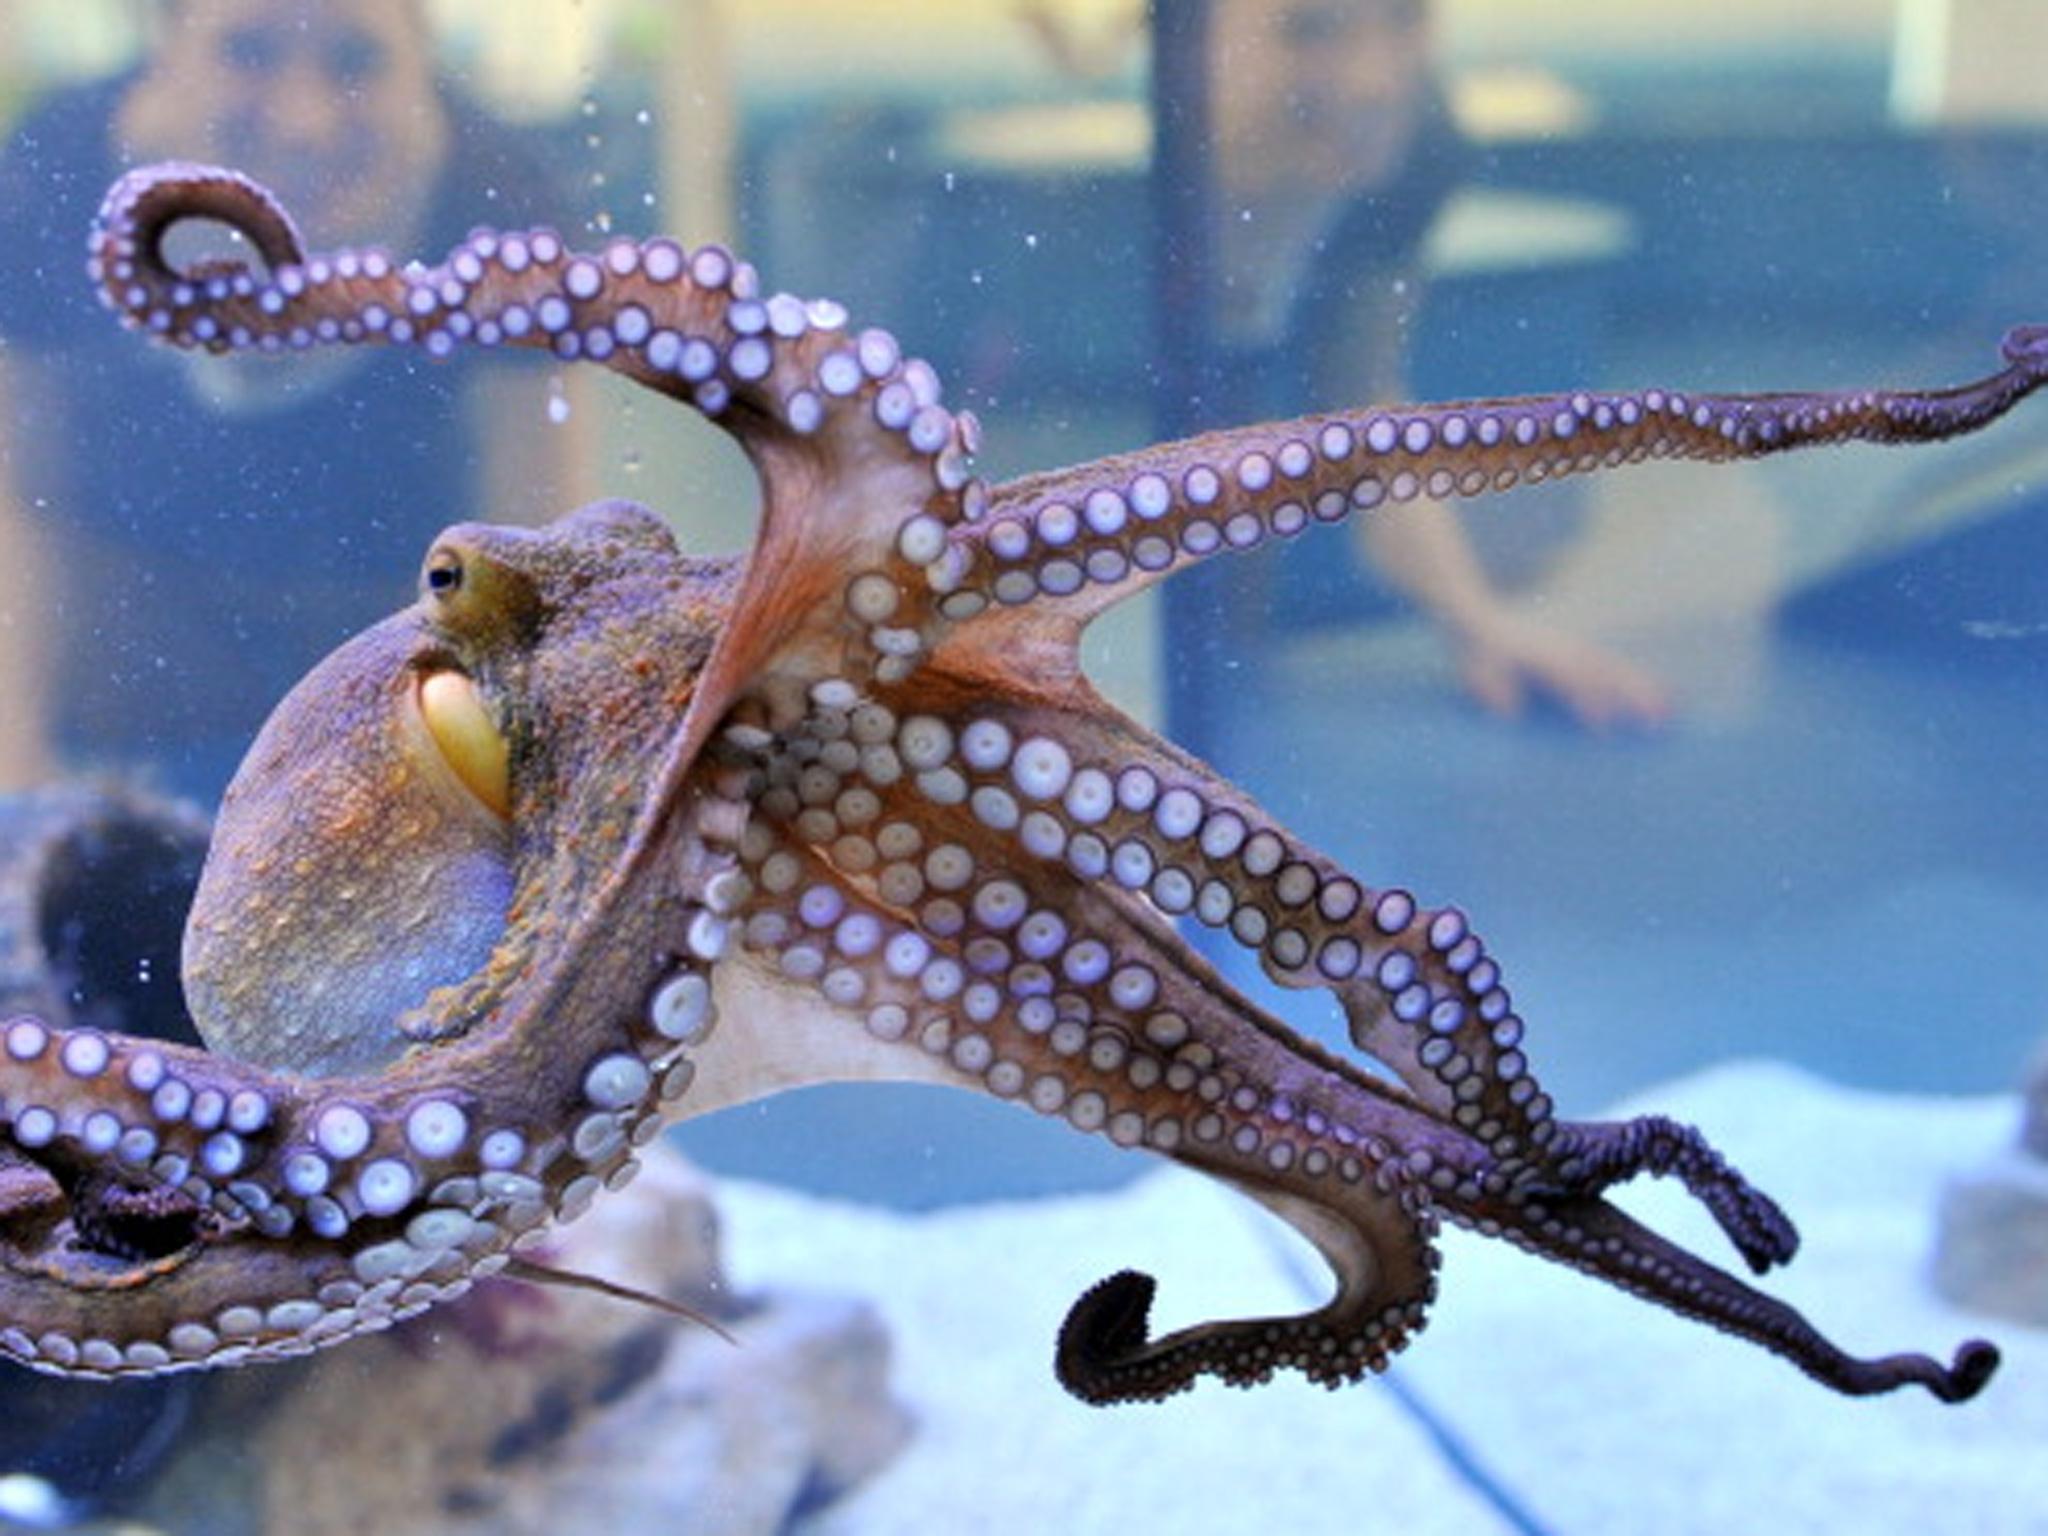 An octopus on display on April 24, 2013 at the State Museum of Natural History in Karlsruhe, Germany